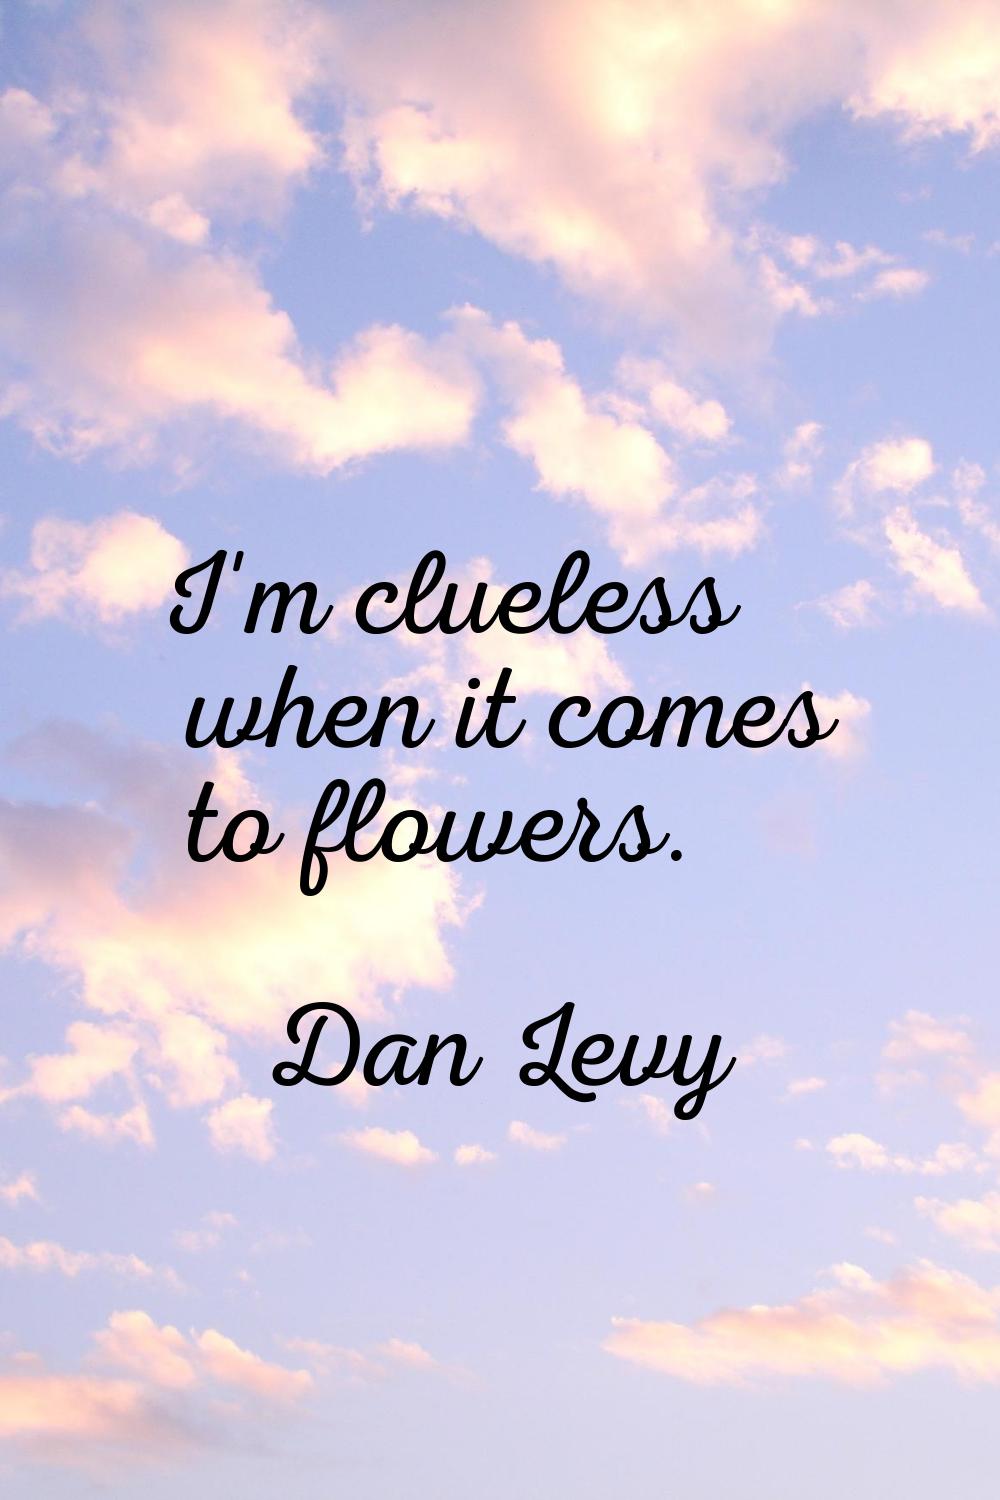 I'm clueless when it comes to flowers.